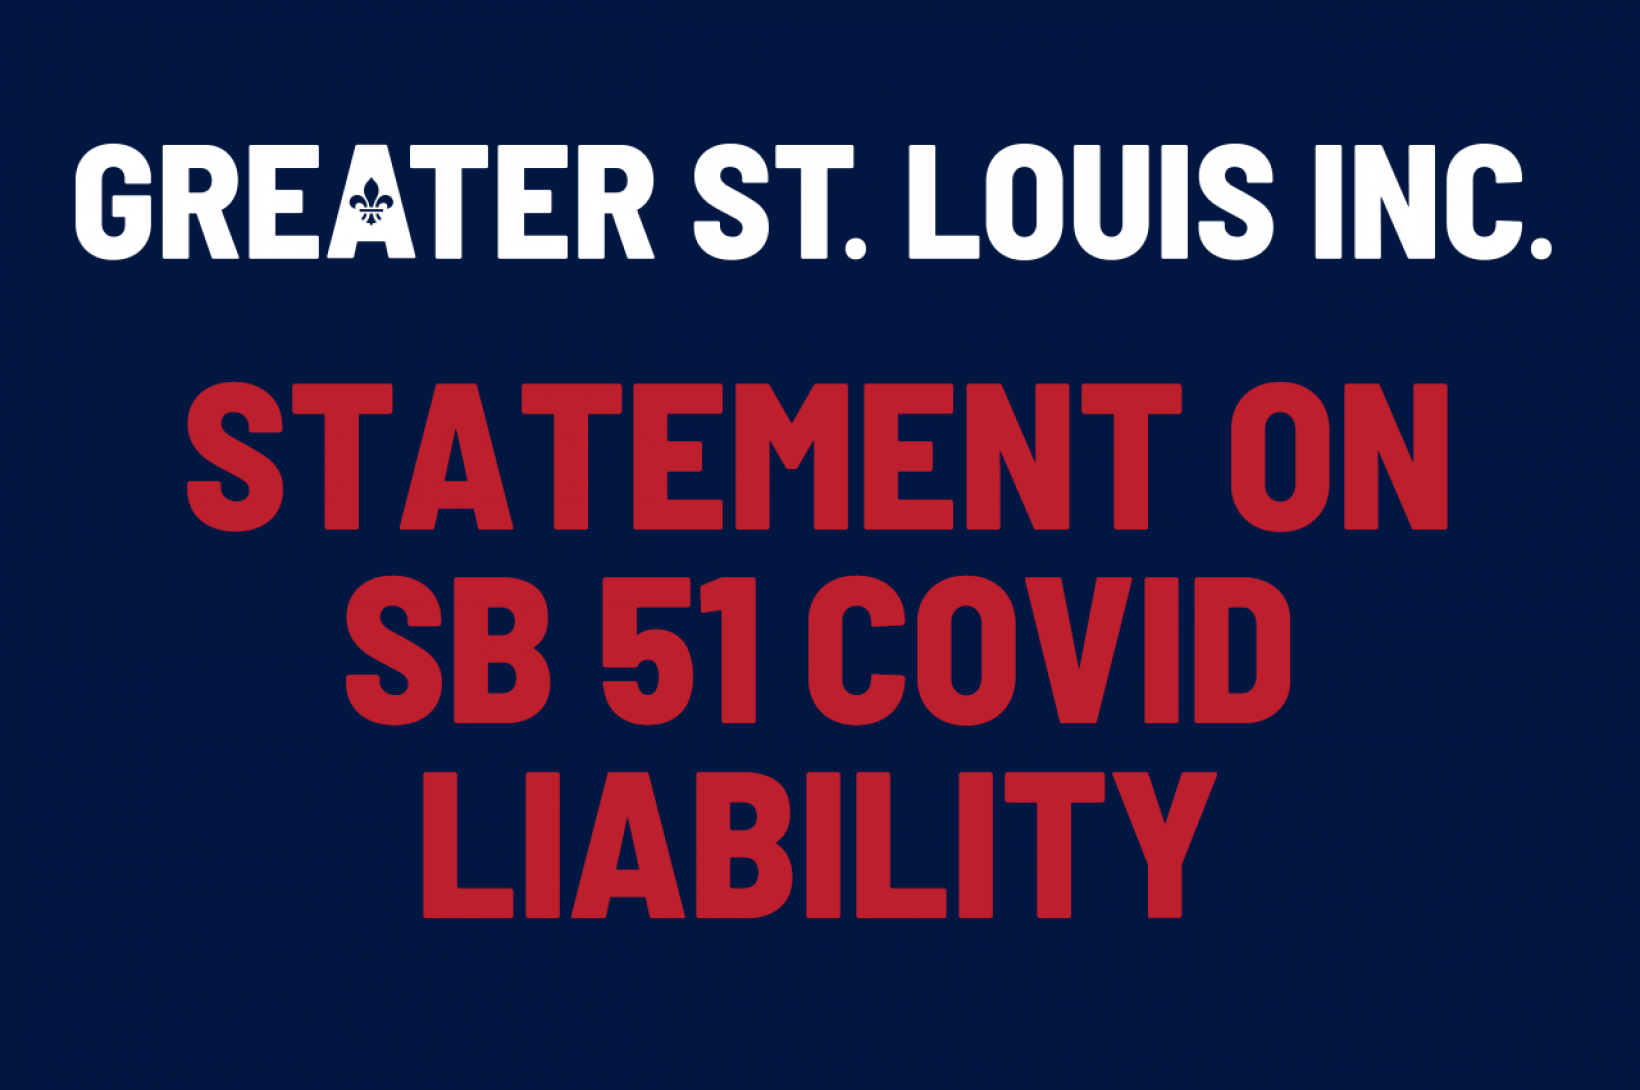 Greater St. Louis Inc. Statement on SB 51 COVID Liability